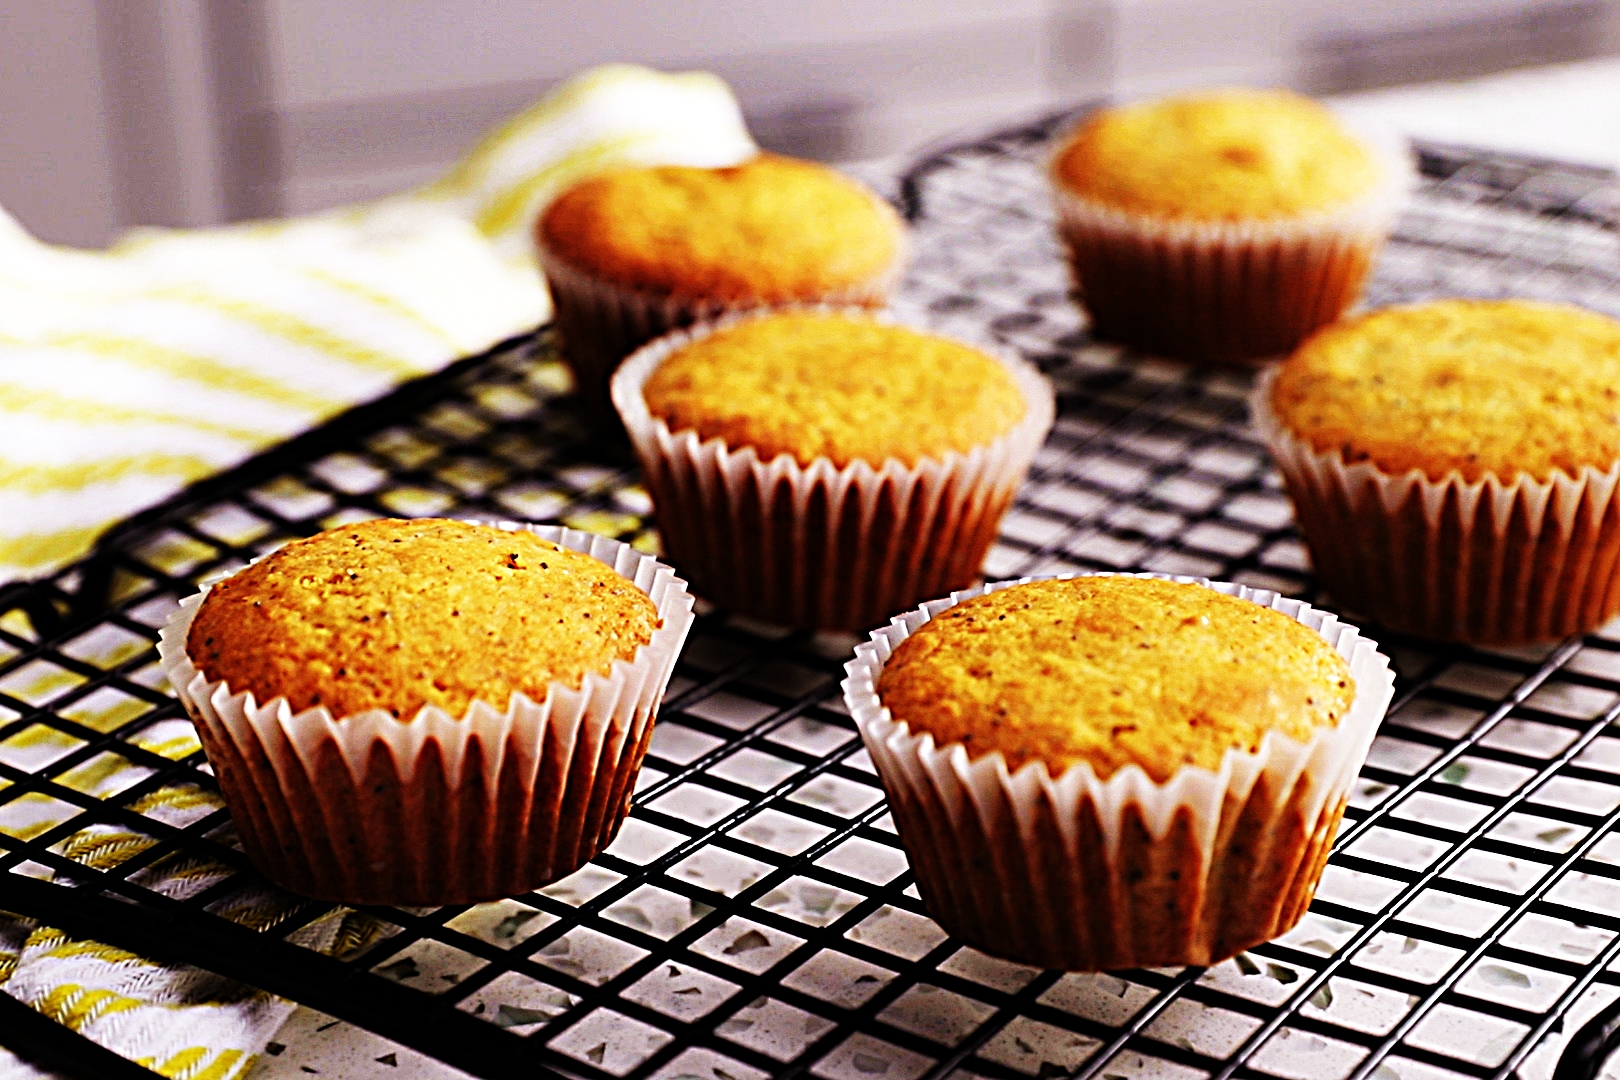 Stupid-Easy Recipe for Lemon Poppyseed Muffins (#1 Top-Rated)